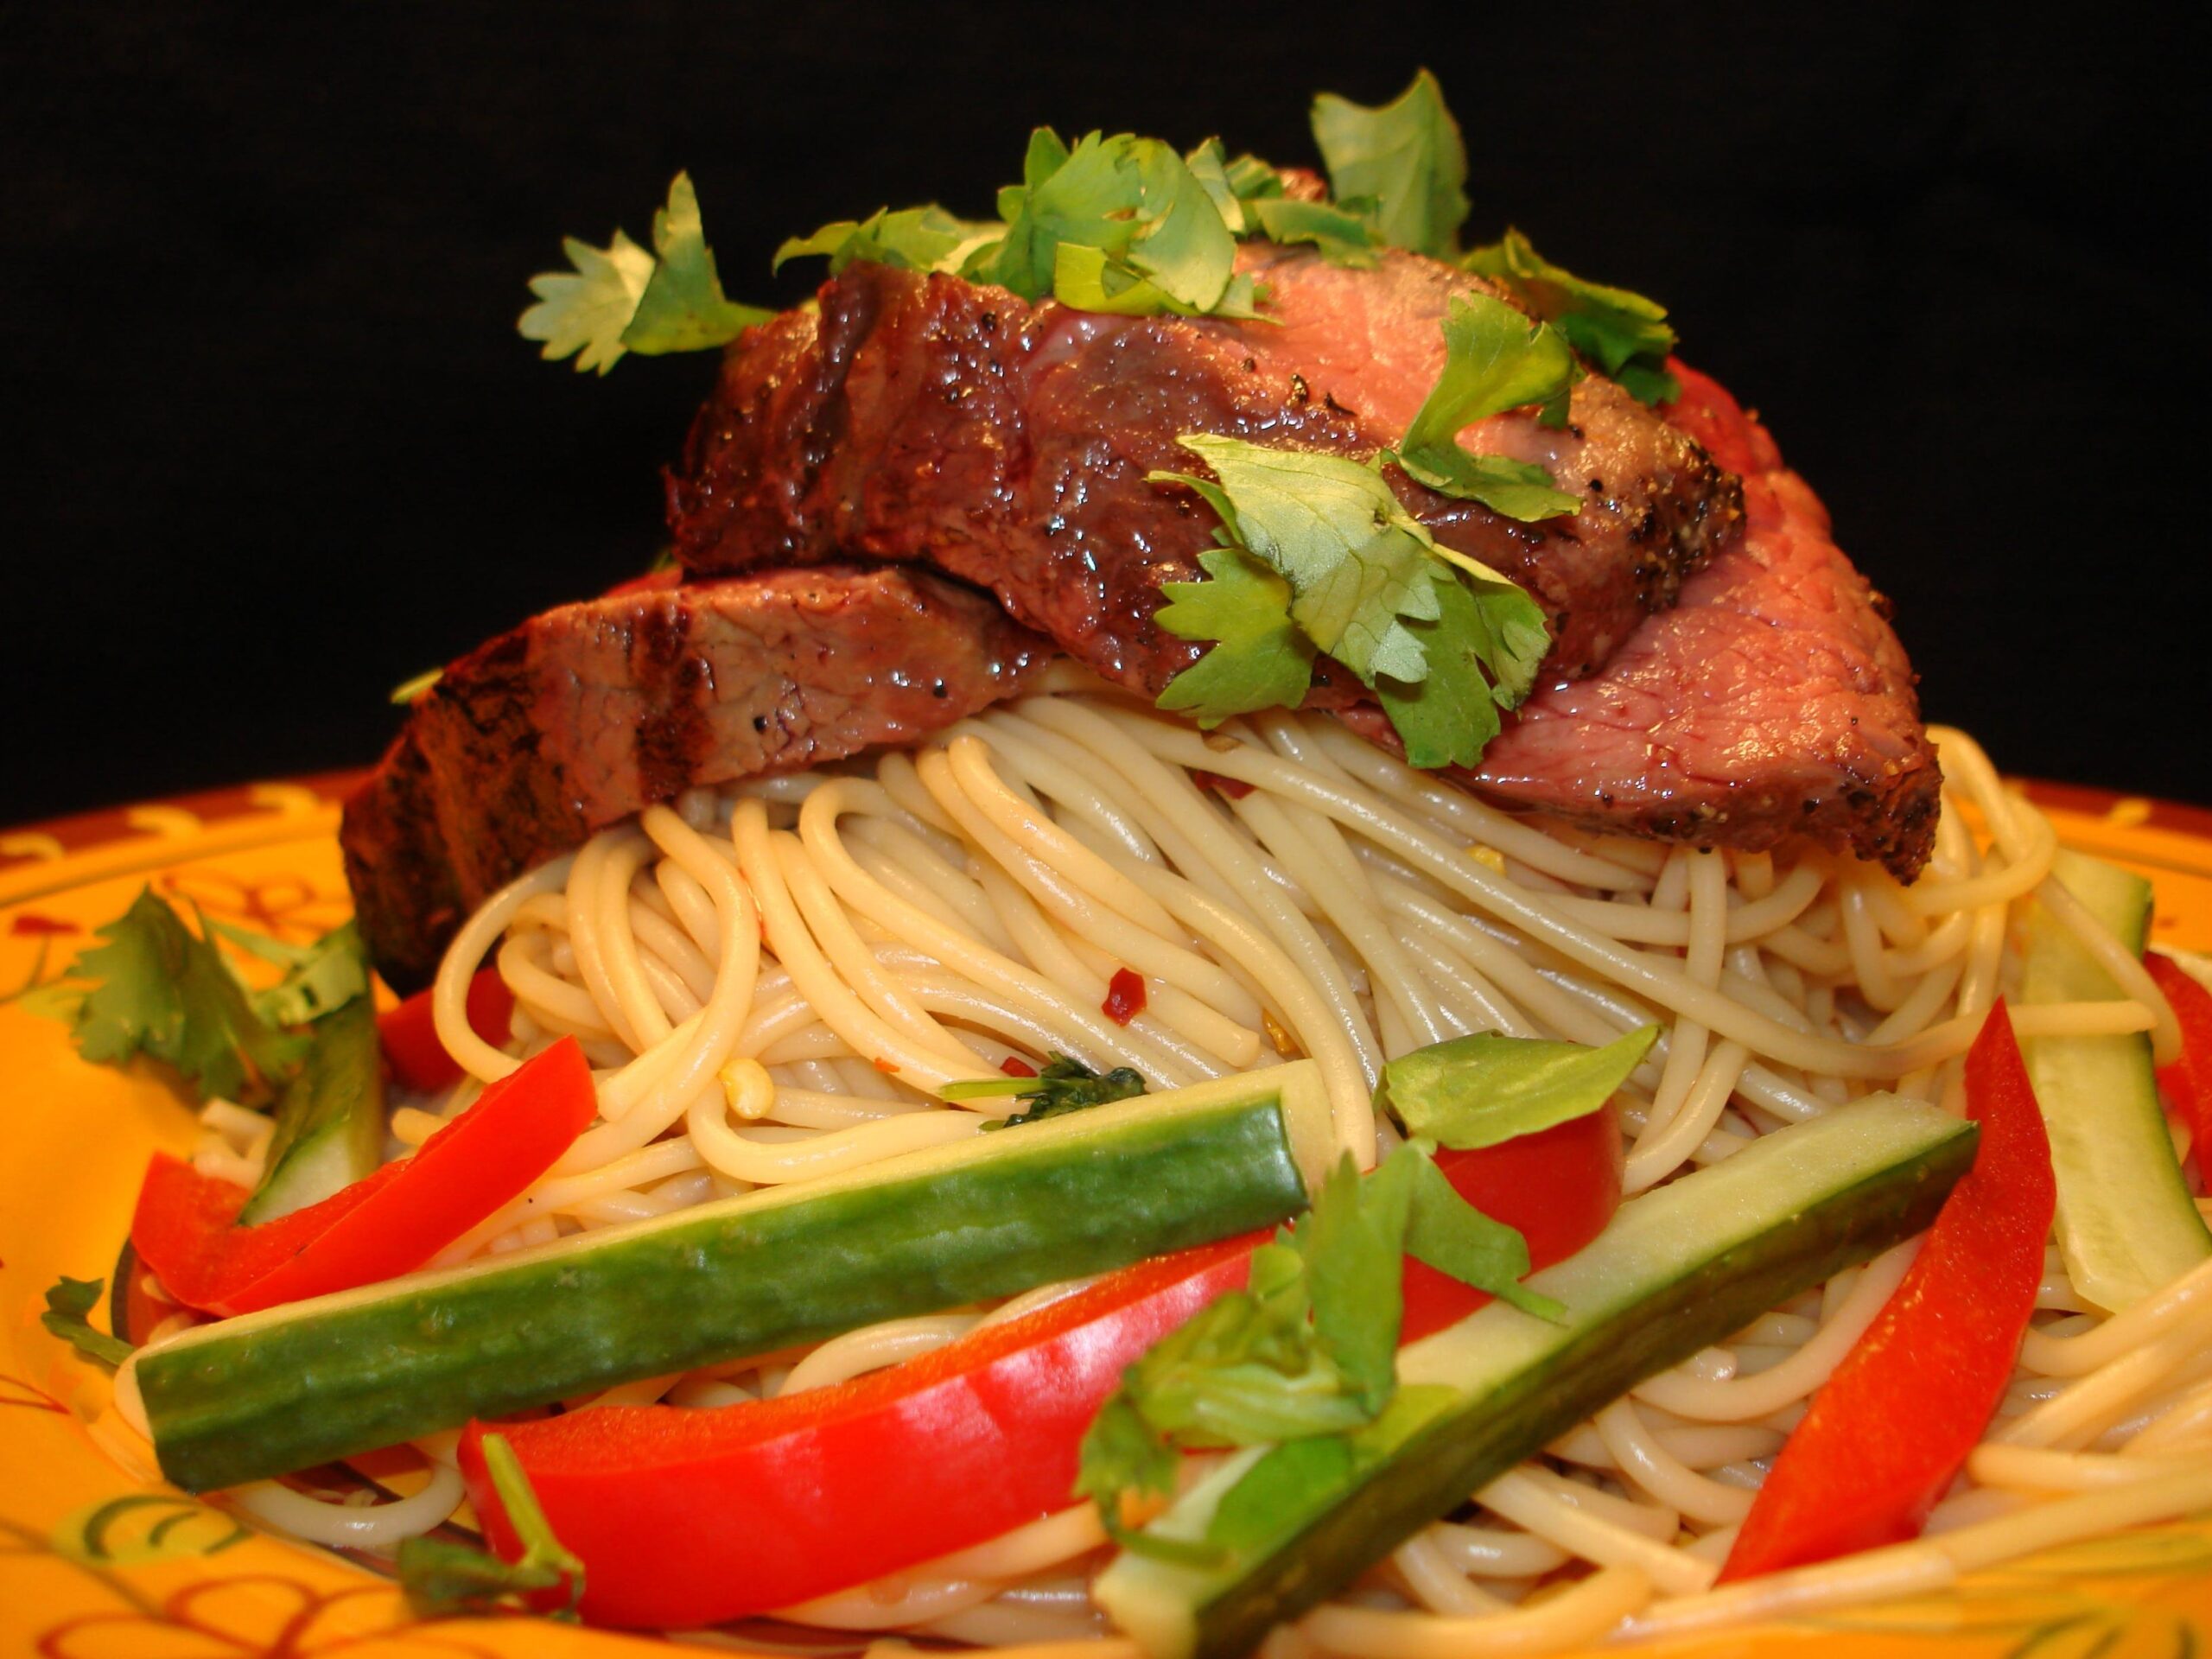 Vietnamese-Style Grilled Steak With Noodles